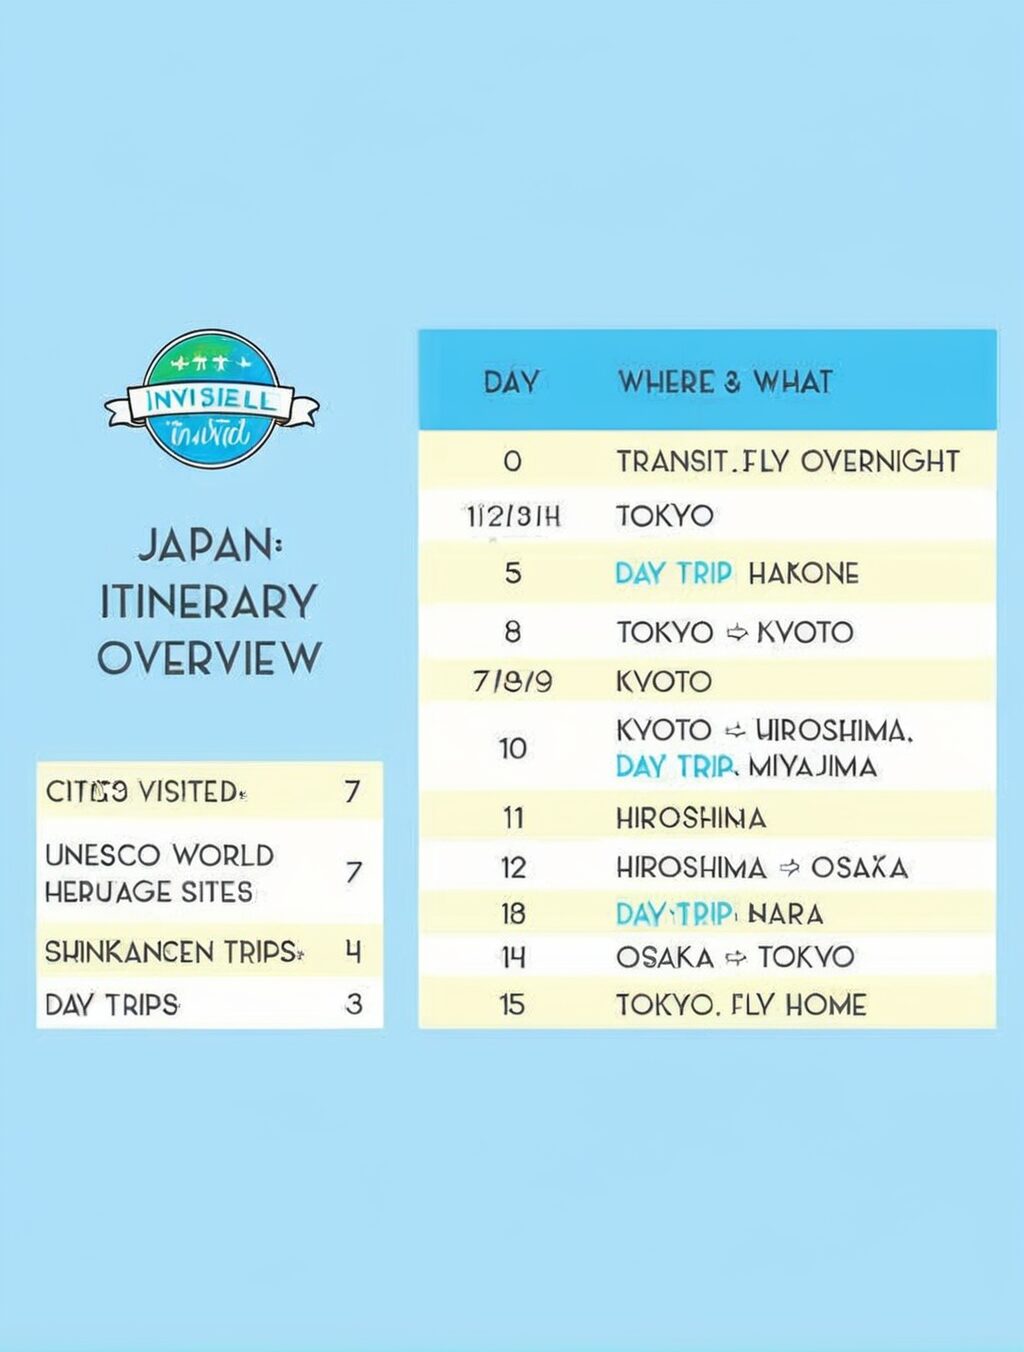 japan itinerary 1 month